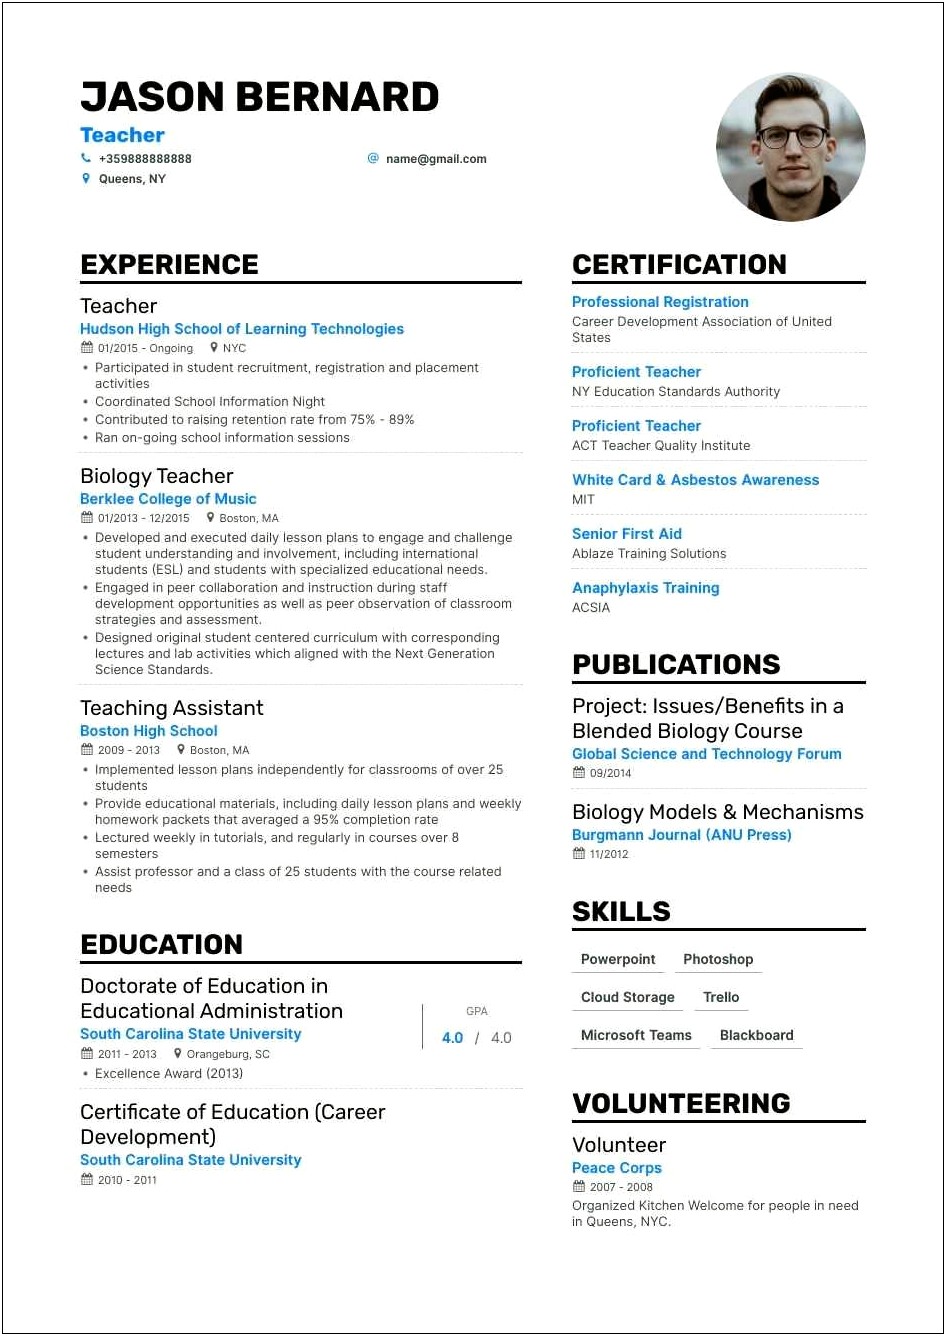 Examples Of Professional Experience On A Teacher Resume